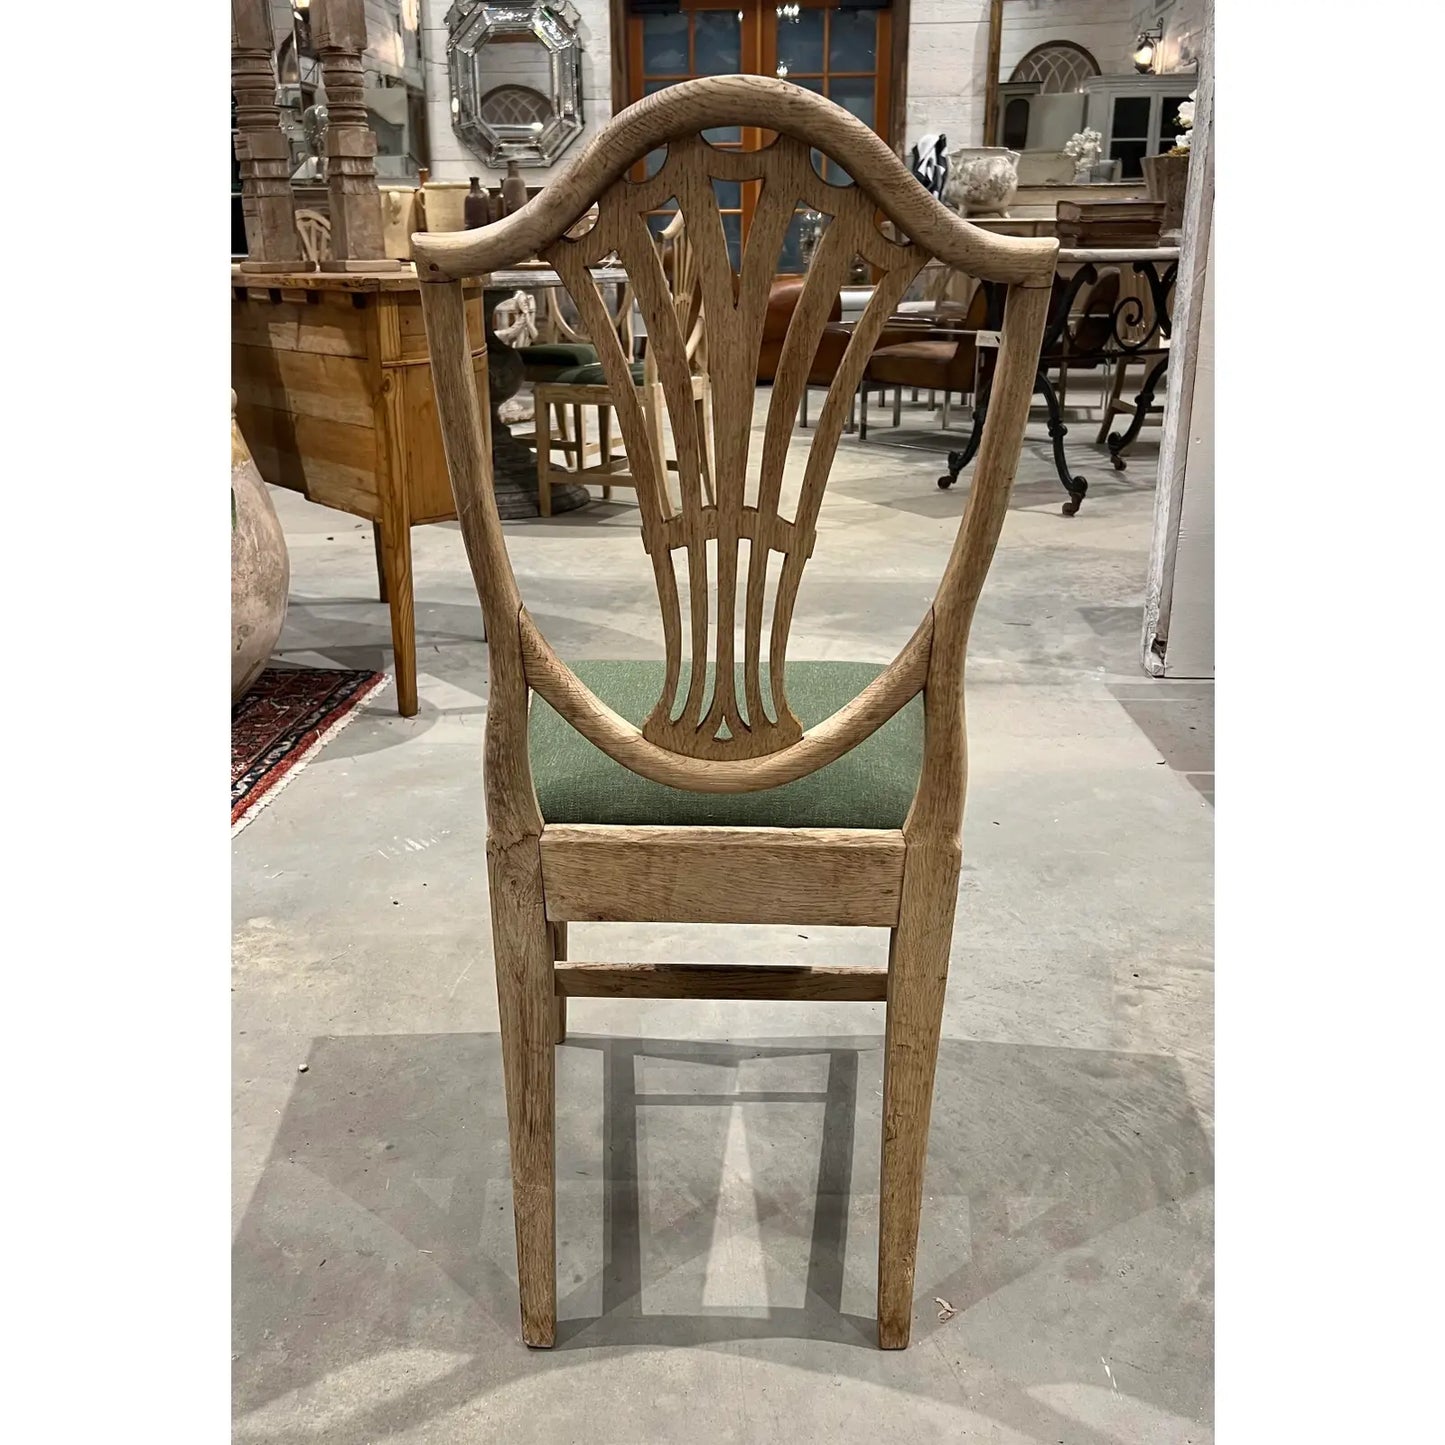 Bleached Oak Dining Chairs - Set of 4 - The White Barn Antiques